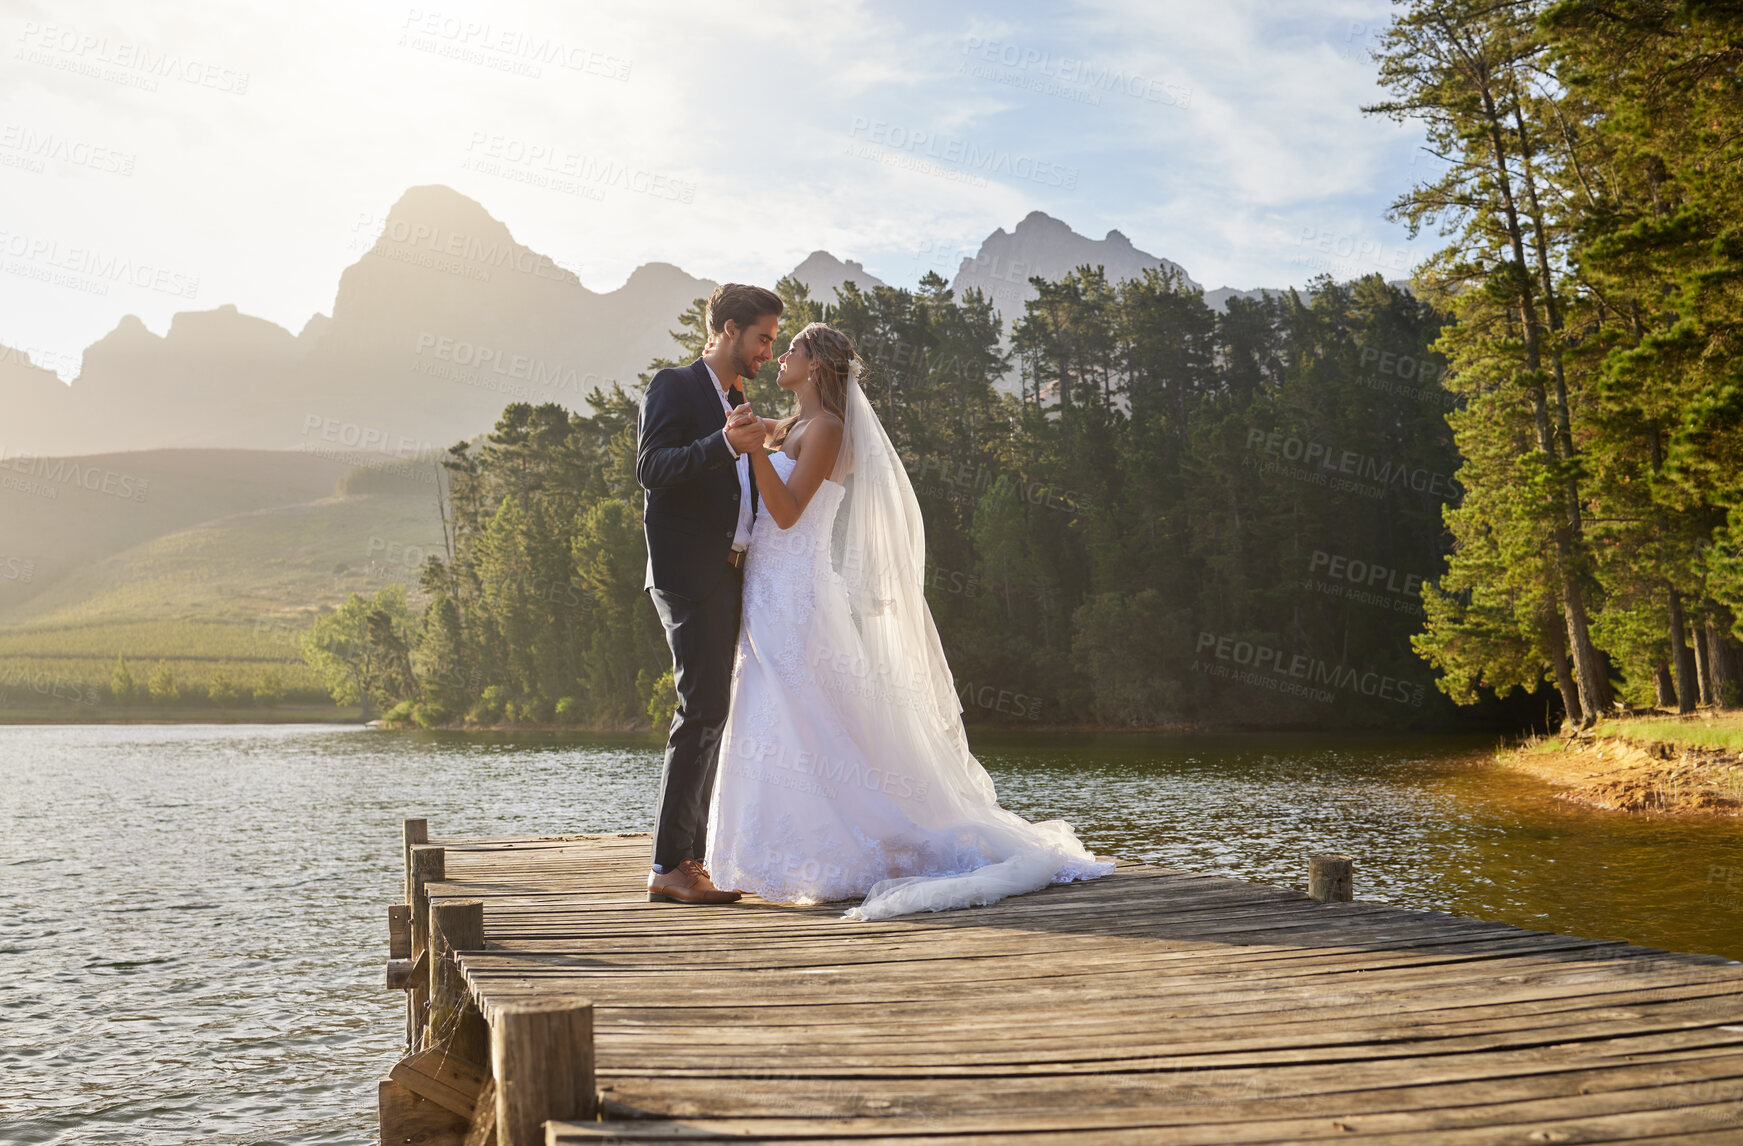 Buy stock photo Love, dance and a married couple on a pier over a lake in nature with a forest in the background after a ceremony. Wedding, romance or water with a bride and groom in celebration of marriage outdoor